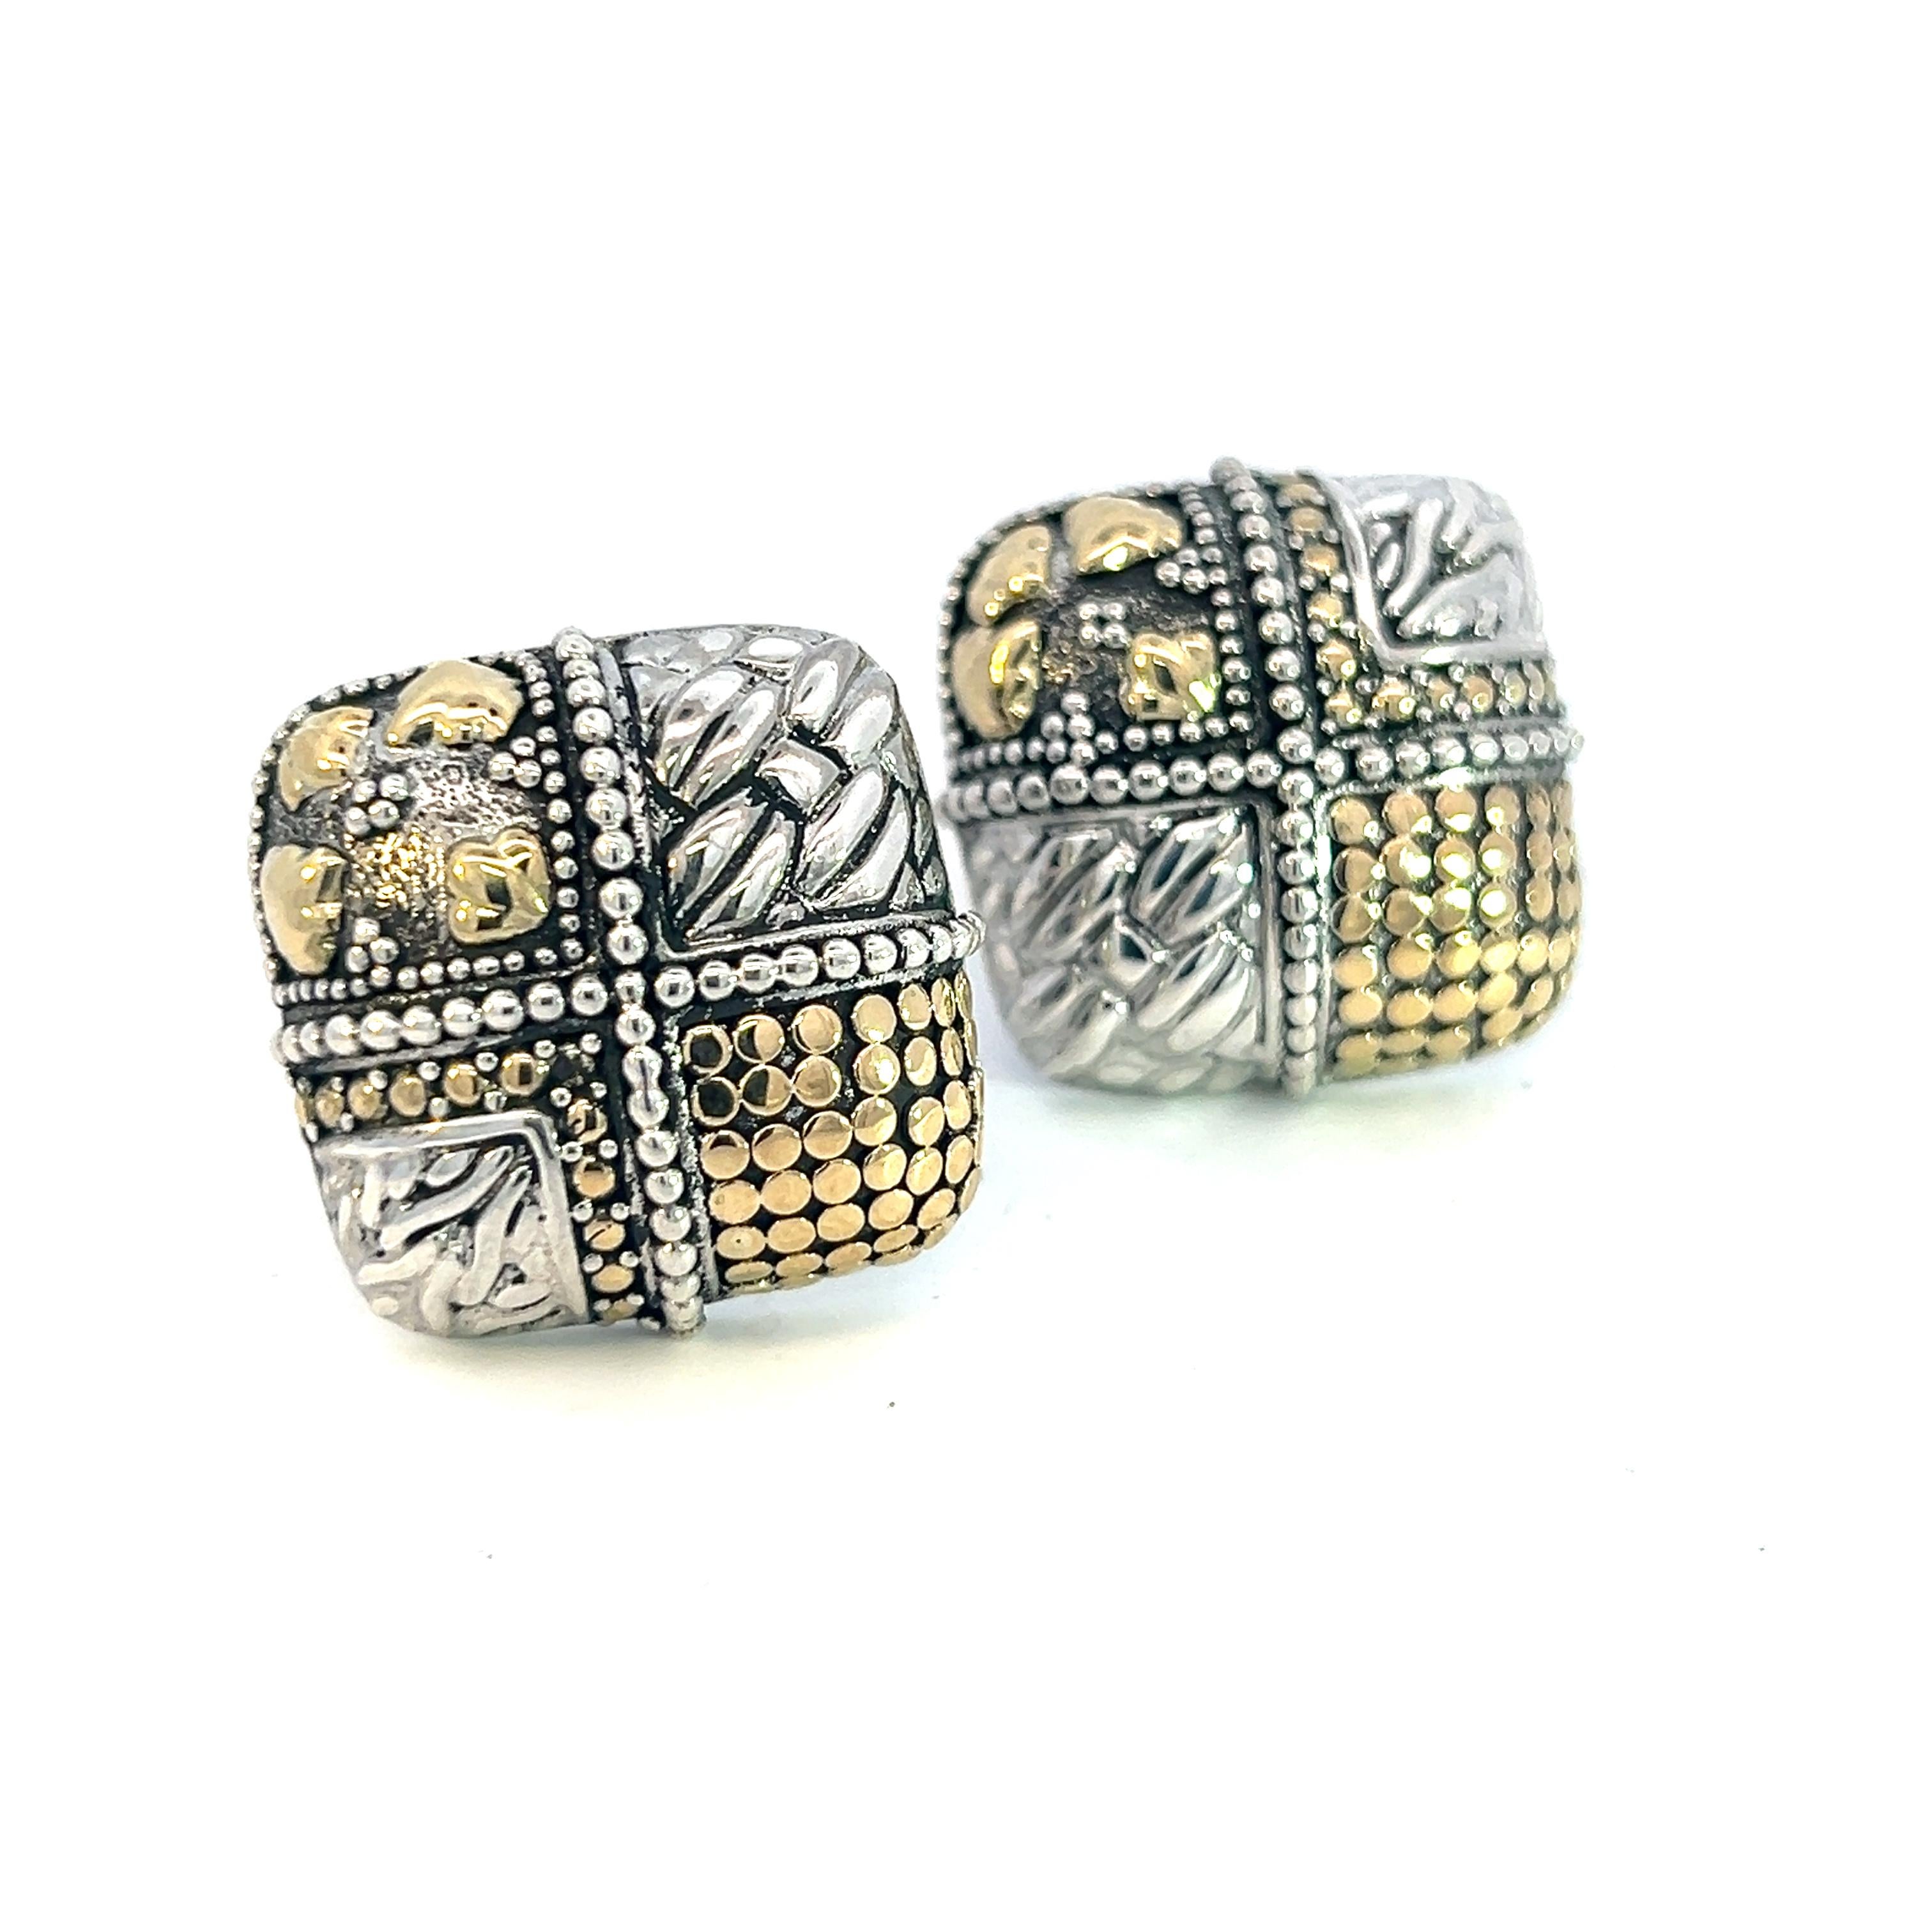 Authentic John Hardy Estate Clip-on Earrings Sterling Silver 18k Y Gold JH69

TRUSTED SELLER SINCE 2002

PLEASE SEE OUR HUNDREDS OF POSITIVE FEEDBACKS FROM OUR CLIENTS!!

FREE SHIPPING!!

DETAILS
Style: Clip-on Earrings
Weight: 17.3 Grams
Metal: